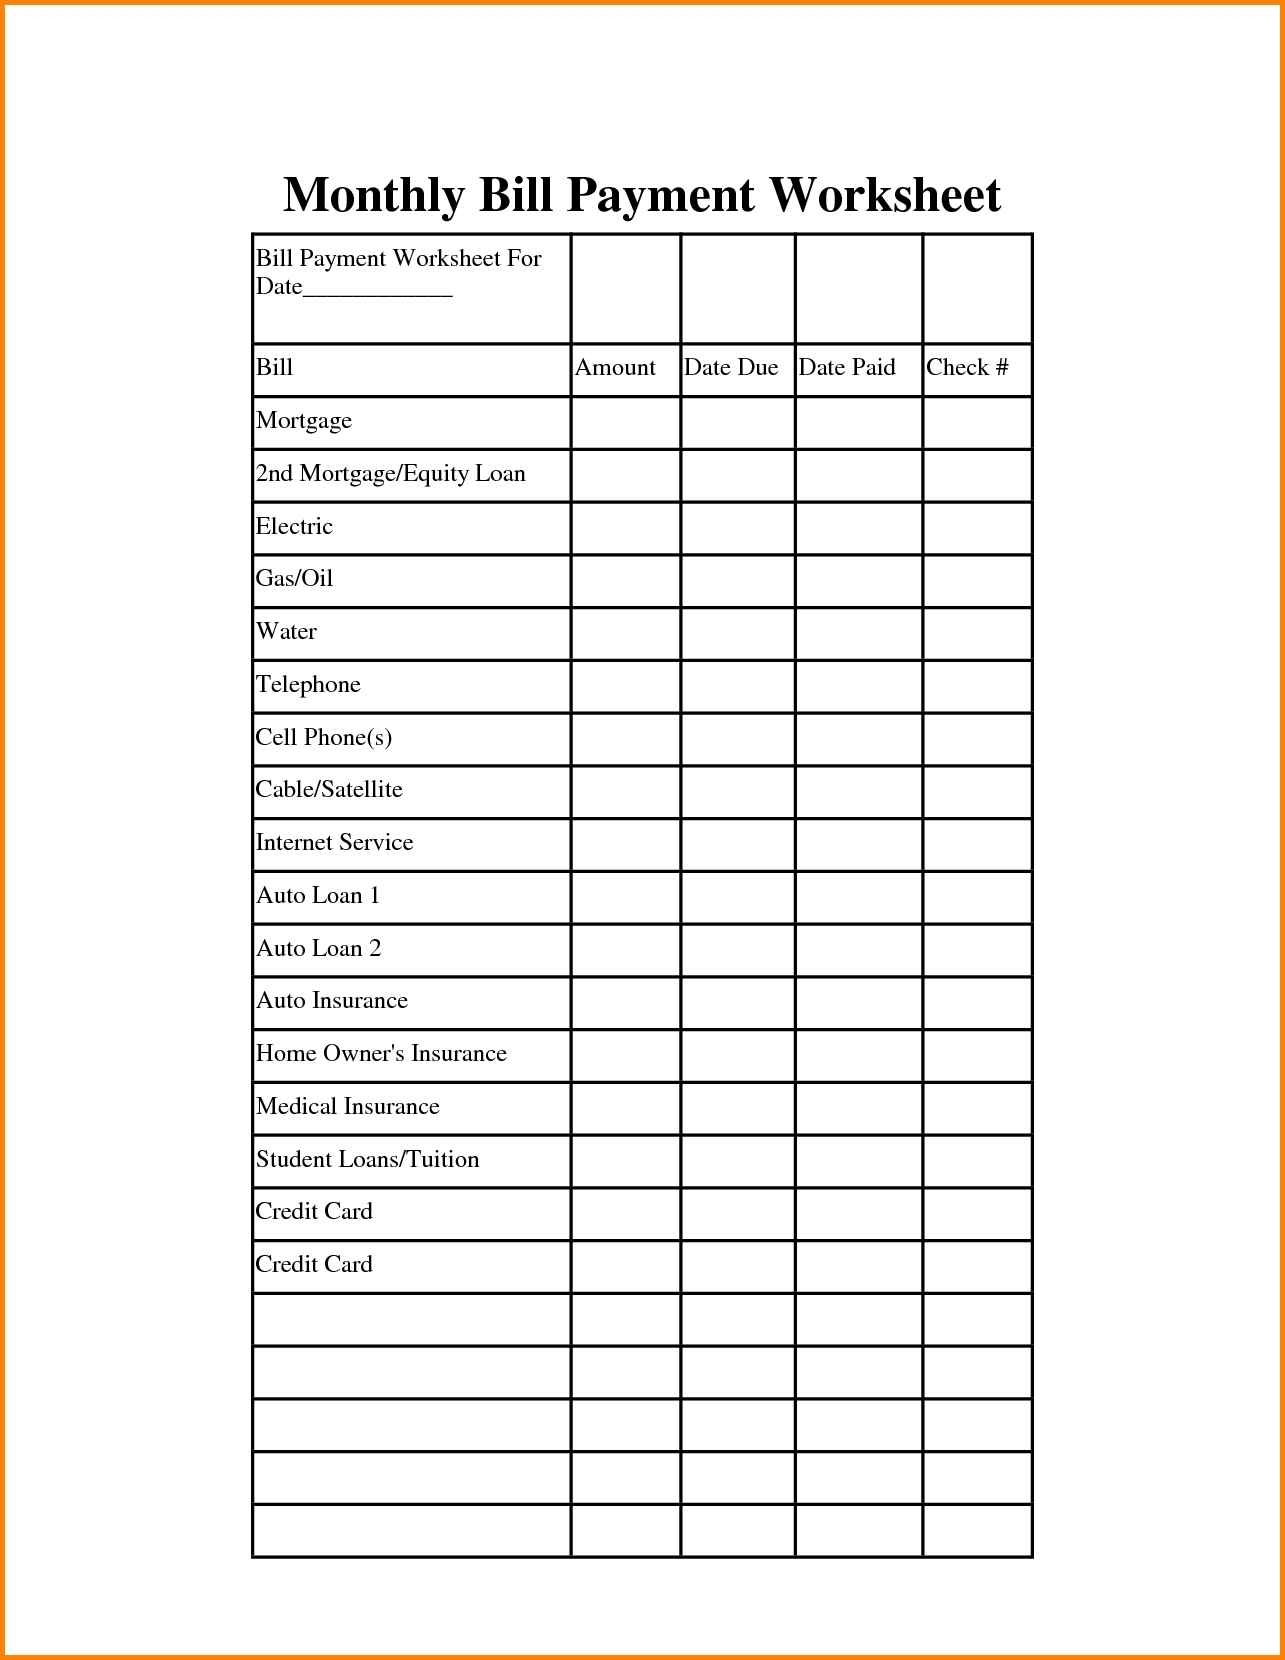 Printable Monthly Bill Payment Worksheet  Calendar within Bill Payment Calendar Printable